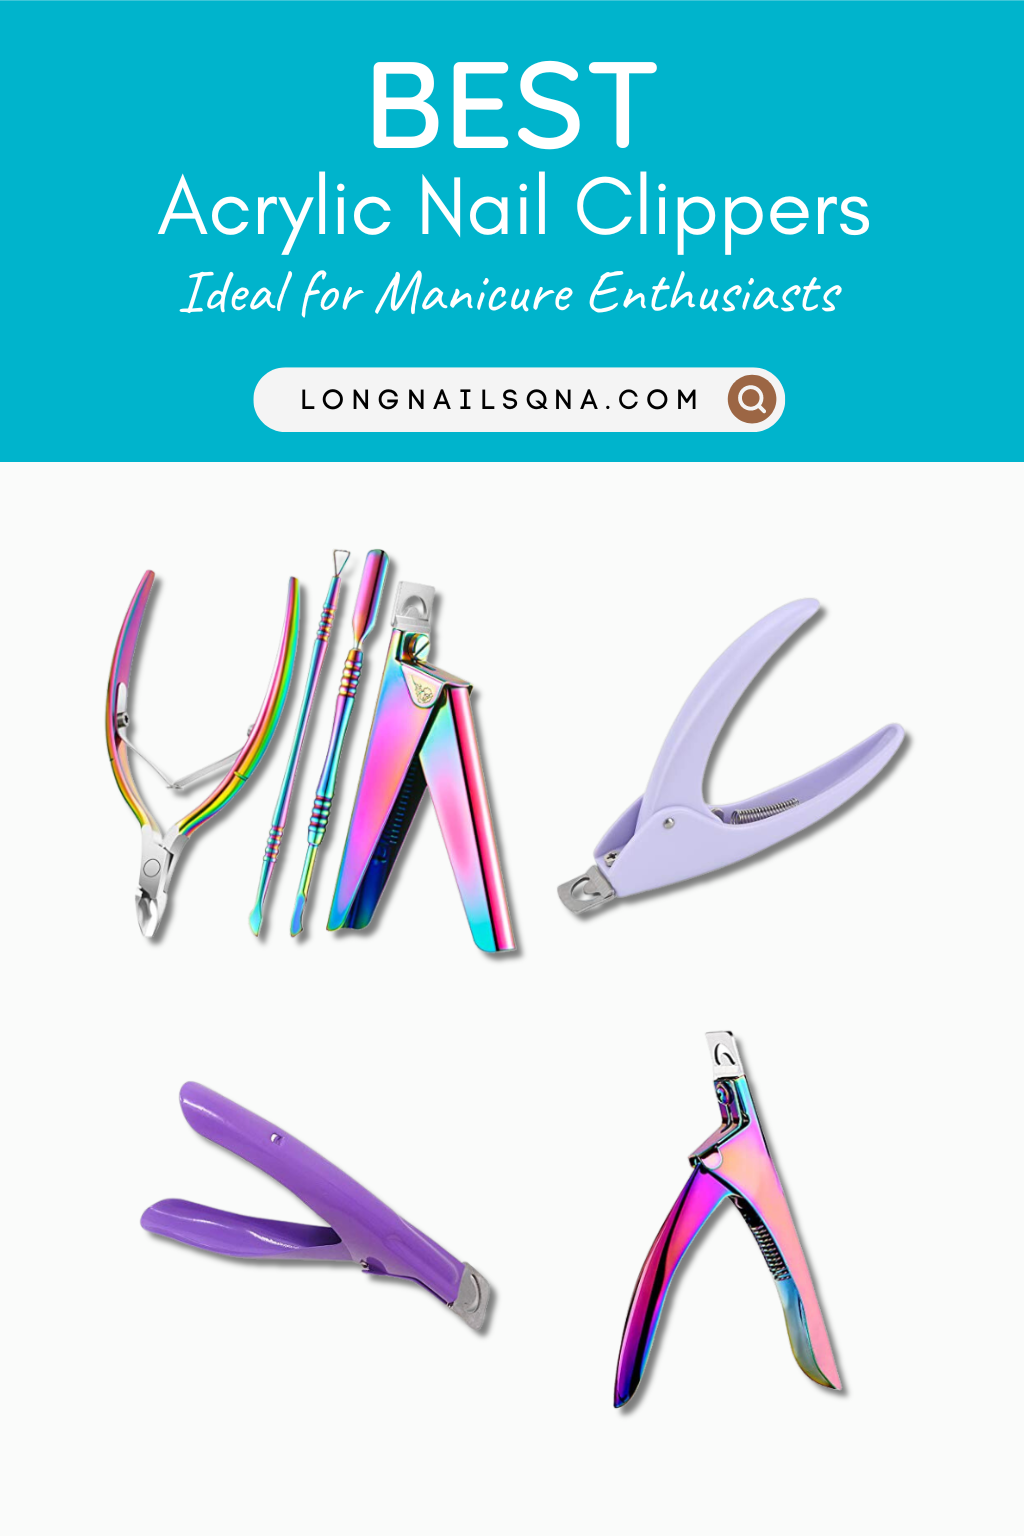 Best Acrylic Nail Clippers - Perfect for manicure enthusiasts